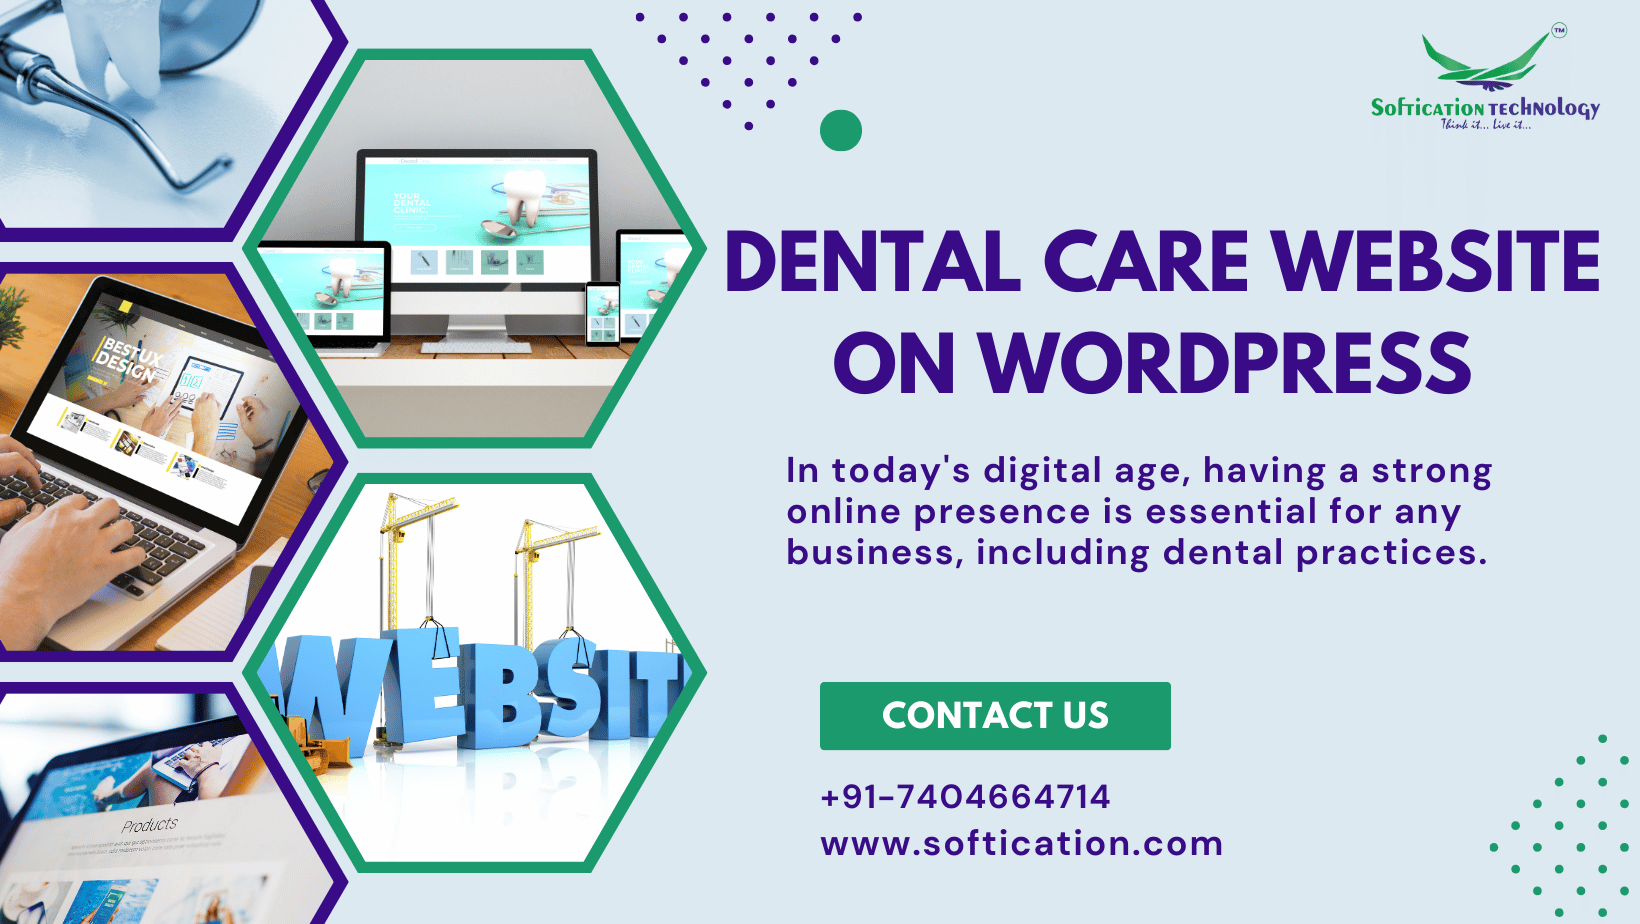 Create an exceptional dental care website on WordPress using premium themes. Learn about essential features, customization tips, and the expert services of SoftiCation Technology to enhance your online presence and attract more patients.